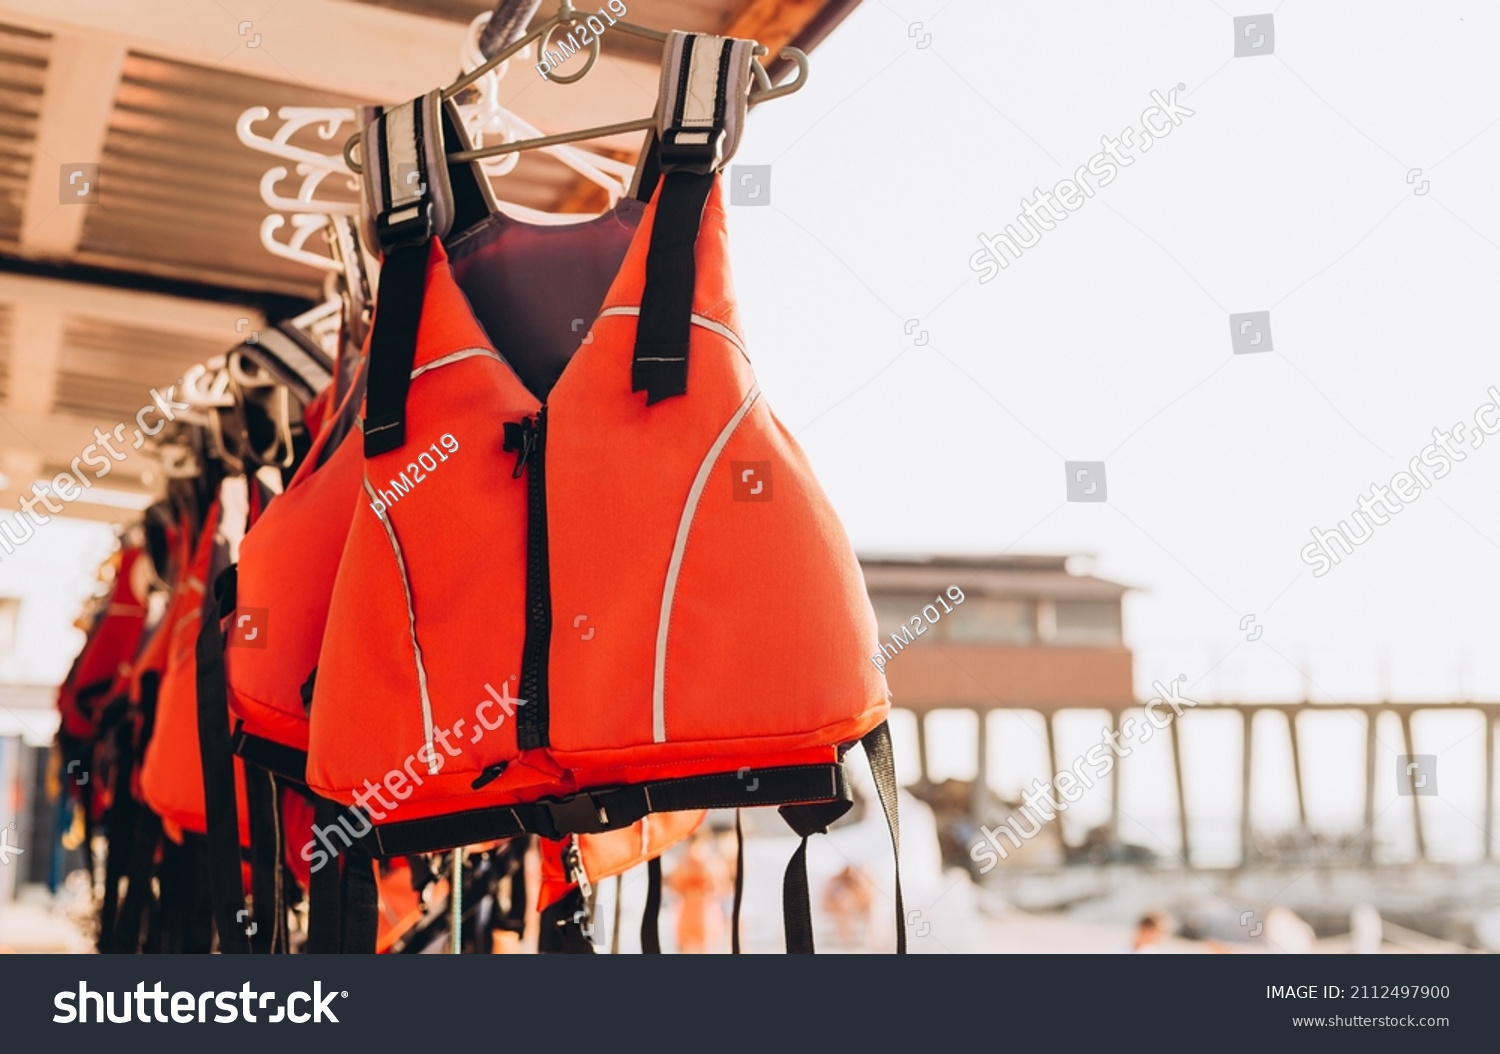 Life jacket on rail for costumer, Red Life jacket with black belts, Personal flotation device. Life jacket ready to be used by tourist going on a boat trip. #2112497900